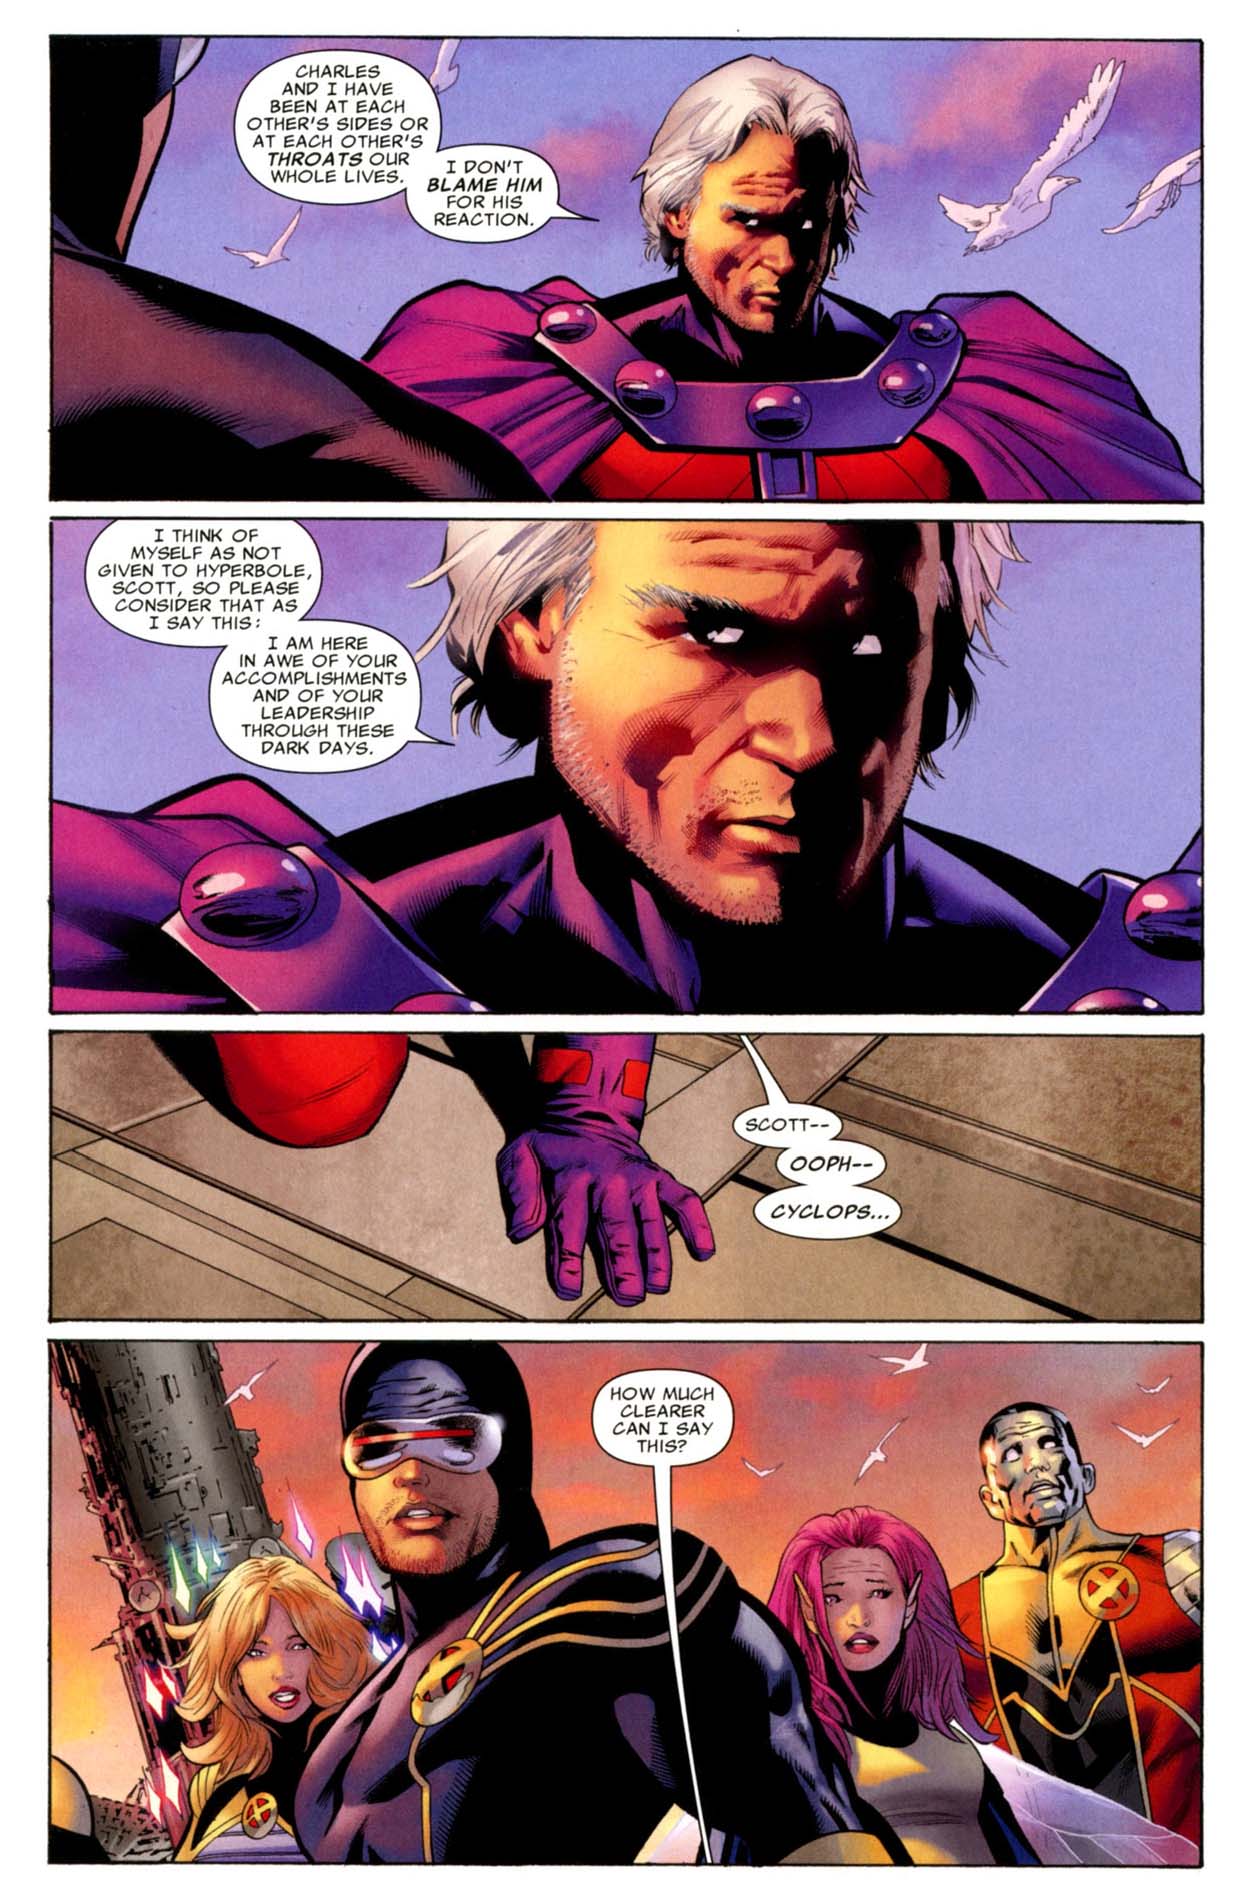 magneto submits to cyclops